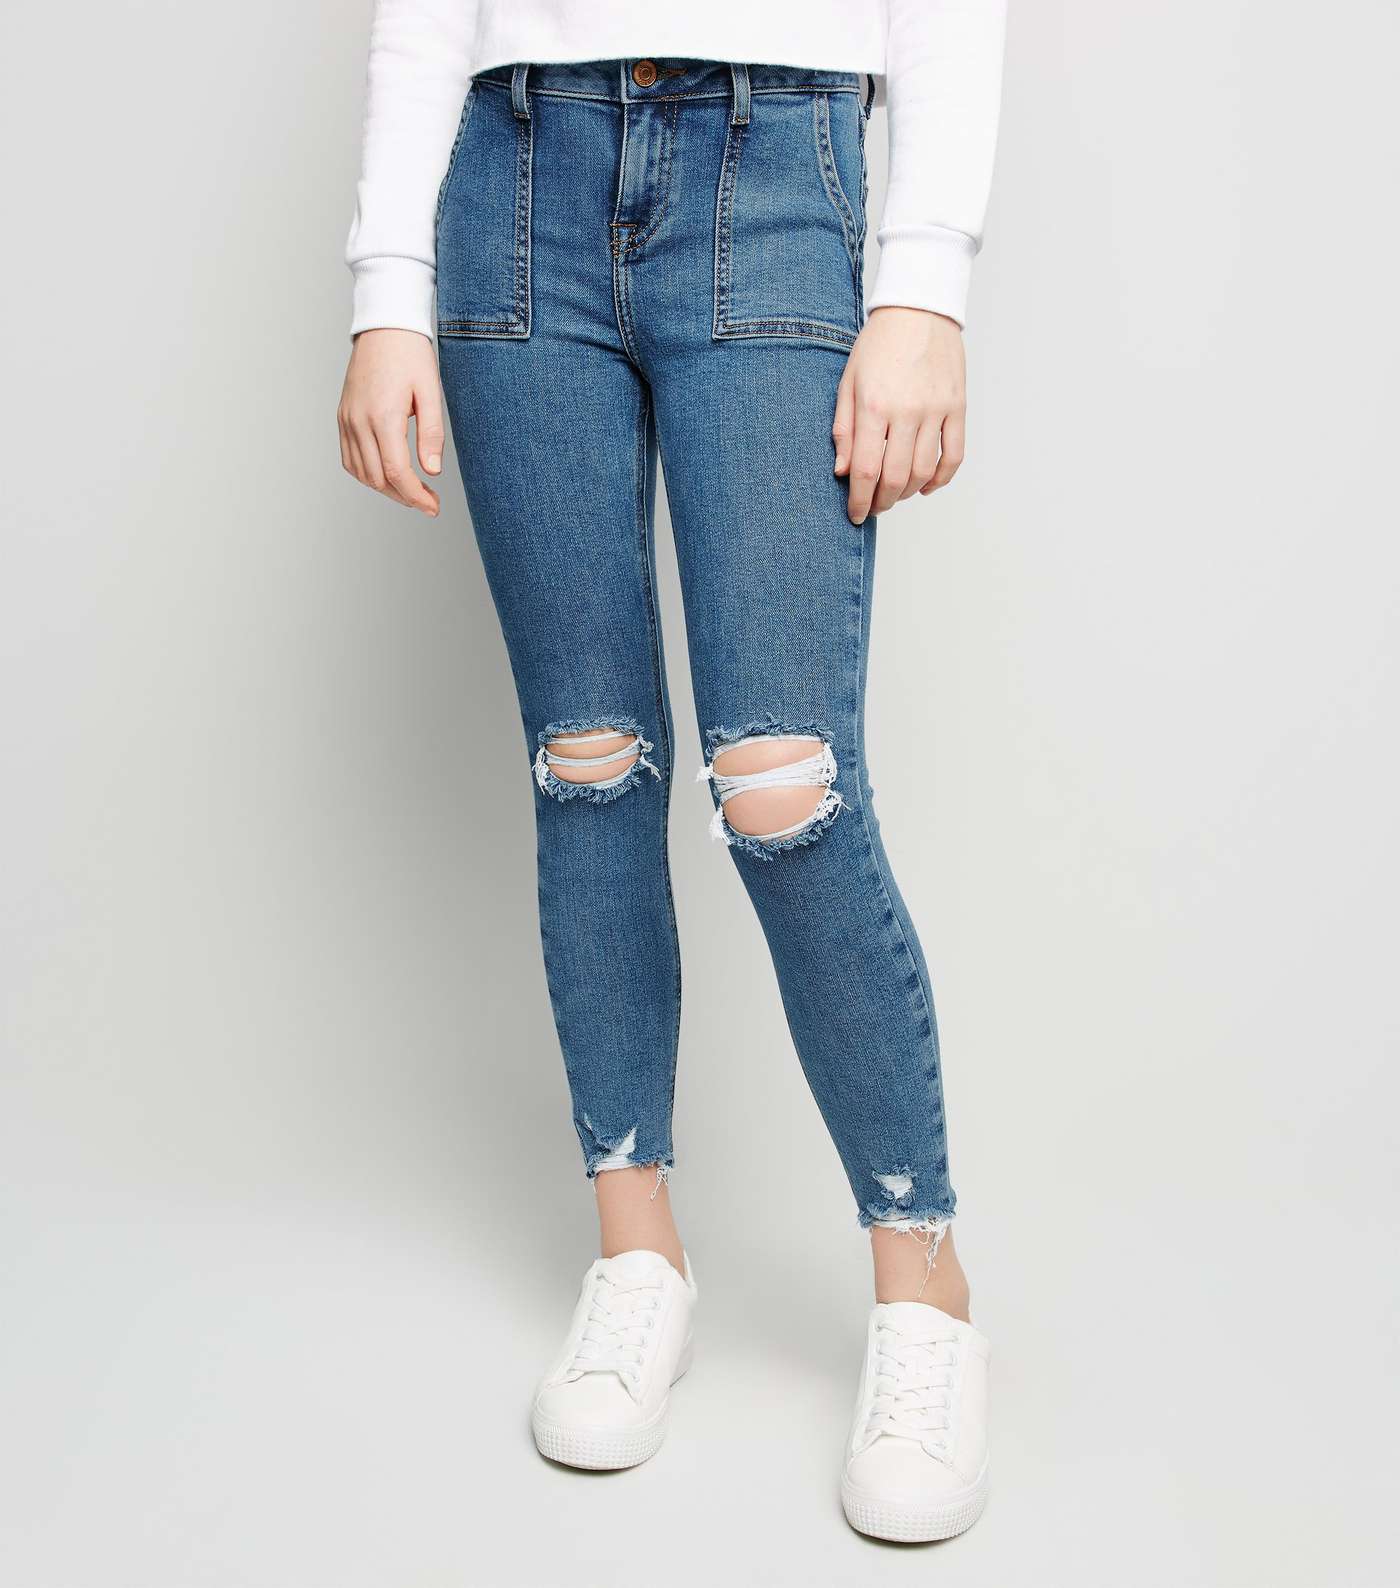 Girls Pale Blue Utility Pocket Ripped Skinny Jeans Image 2